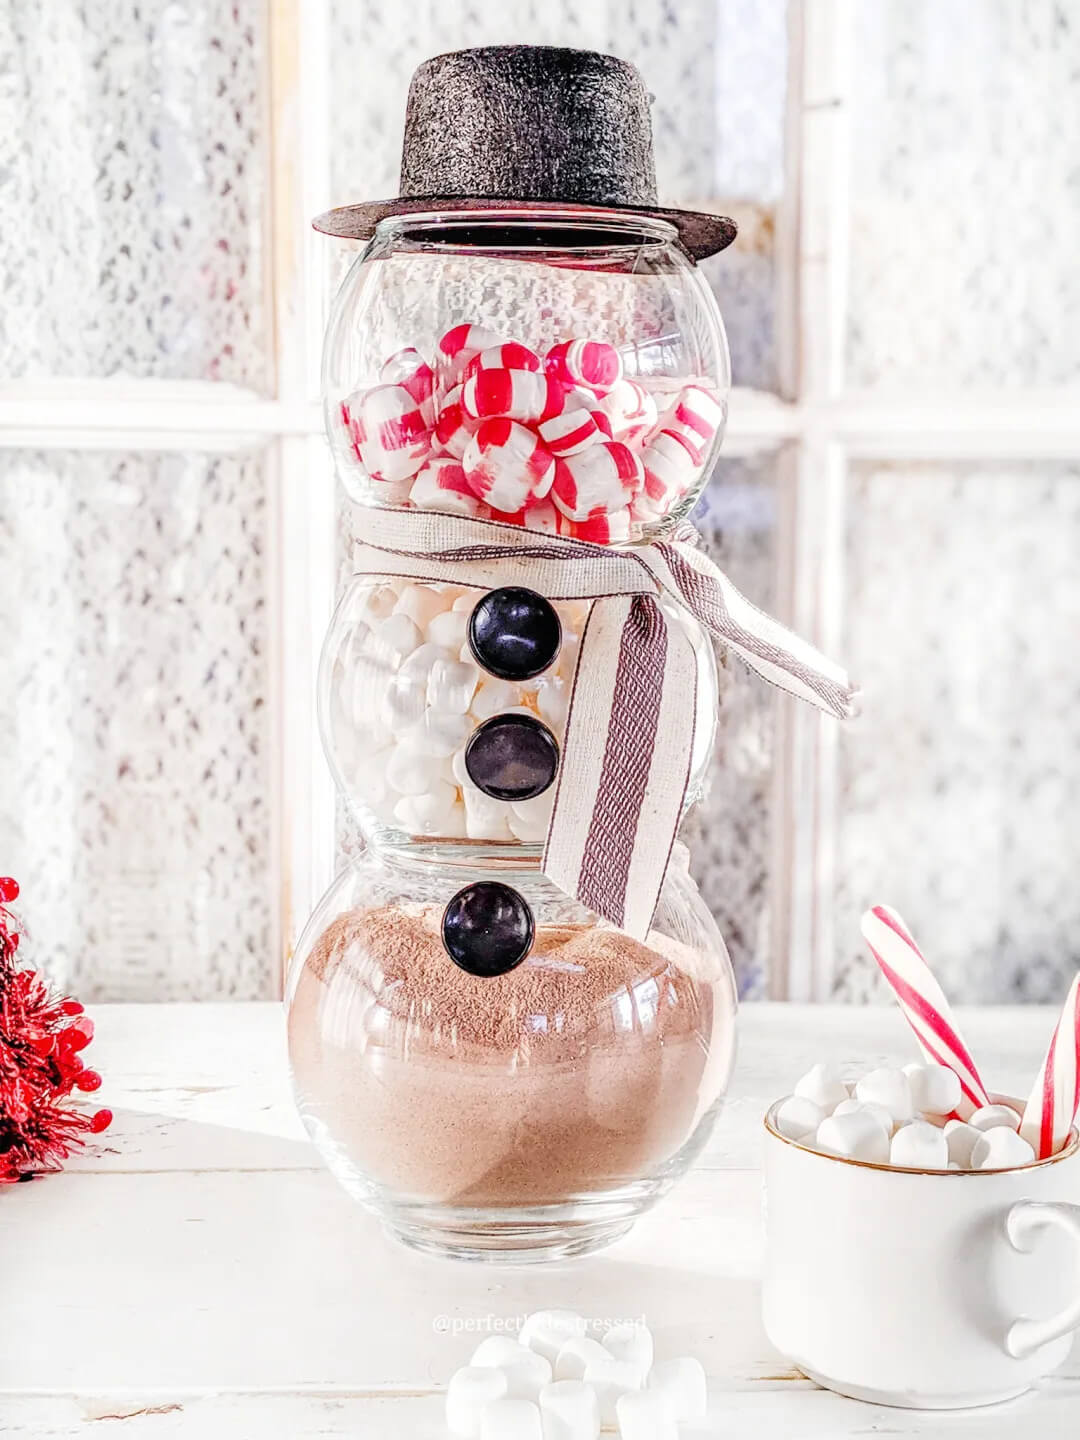 DIY Snowman Jar Craft Made With Cocoa